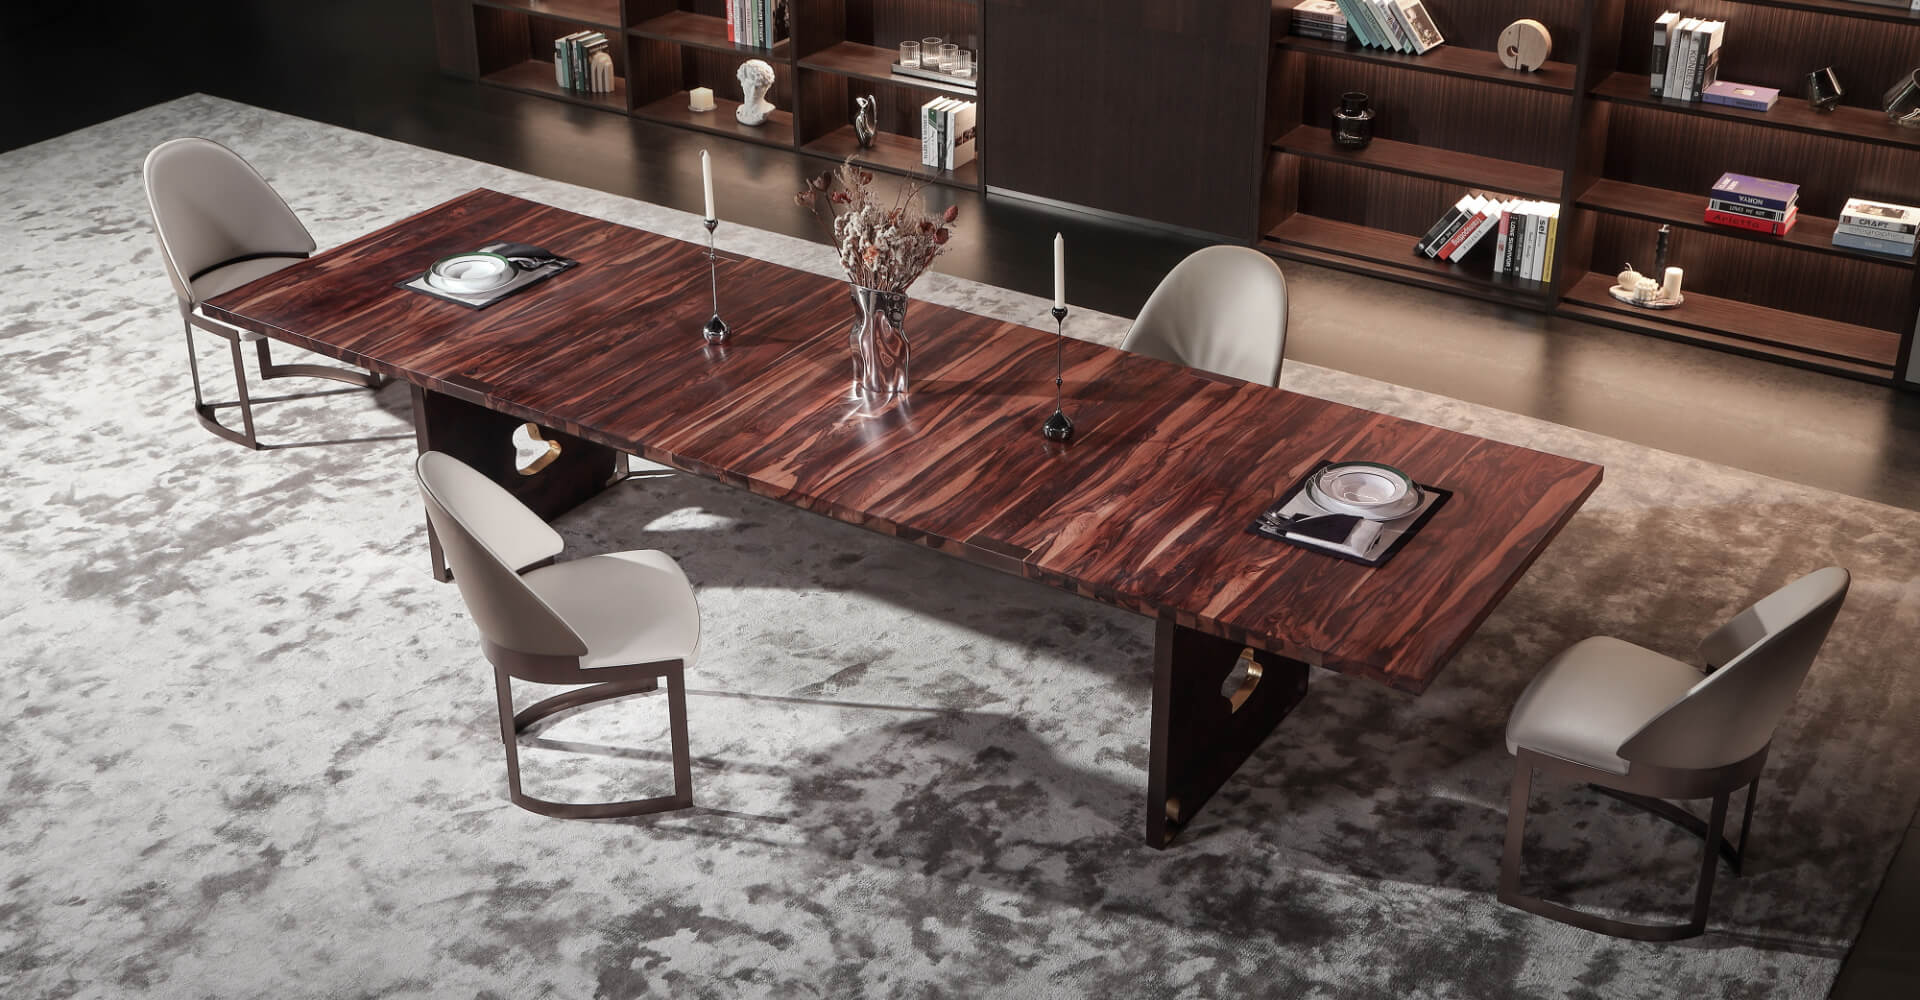 Avata Dining Table - s